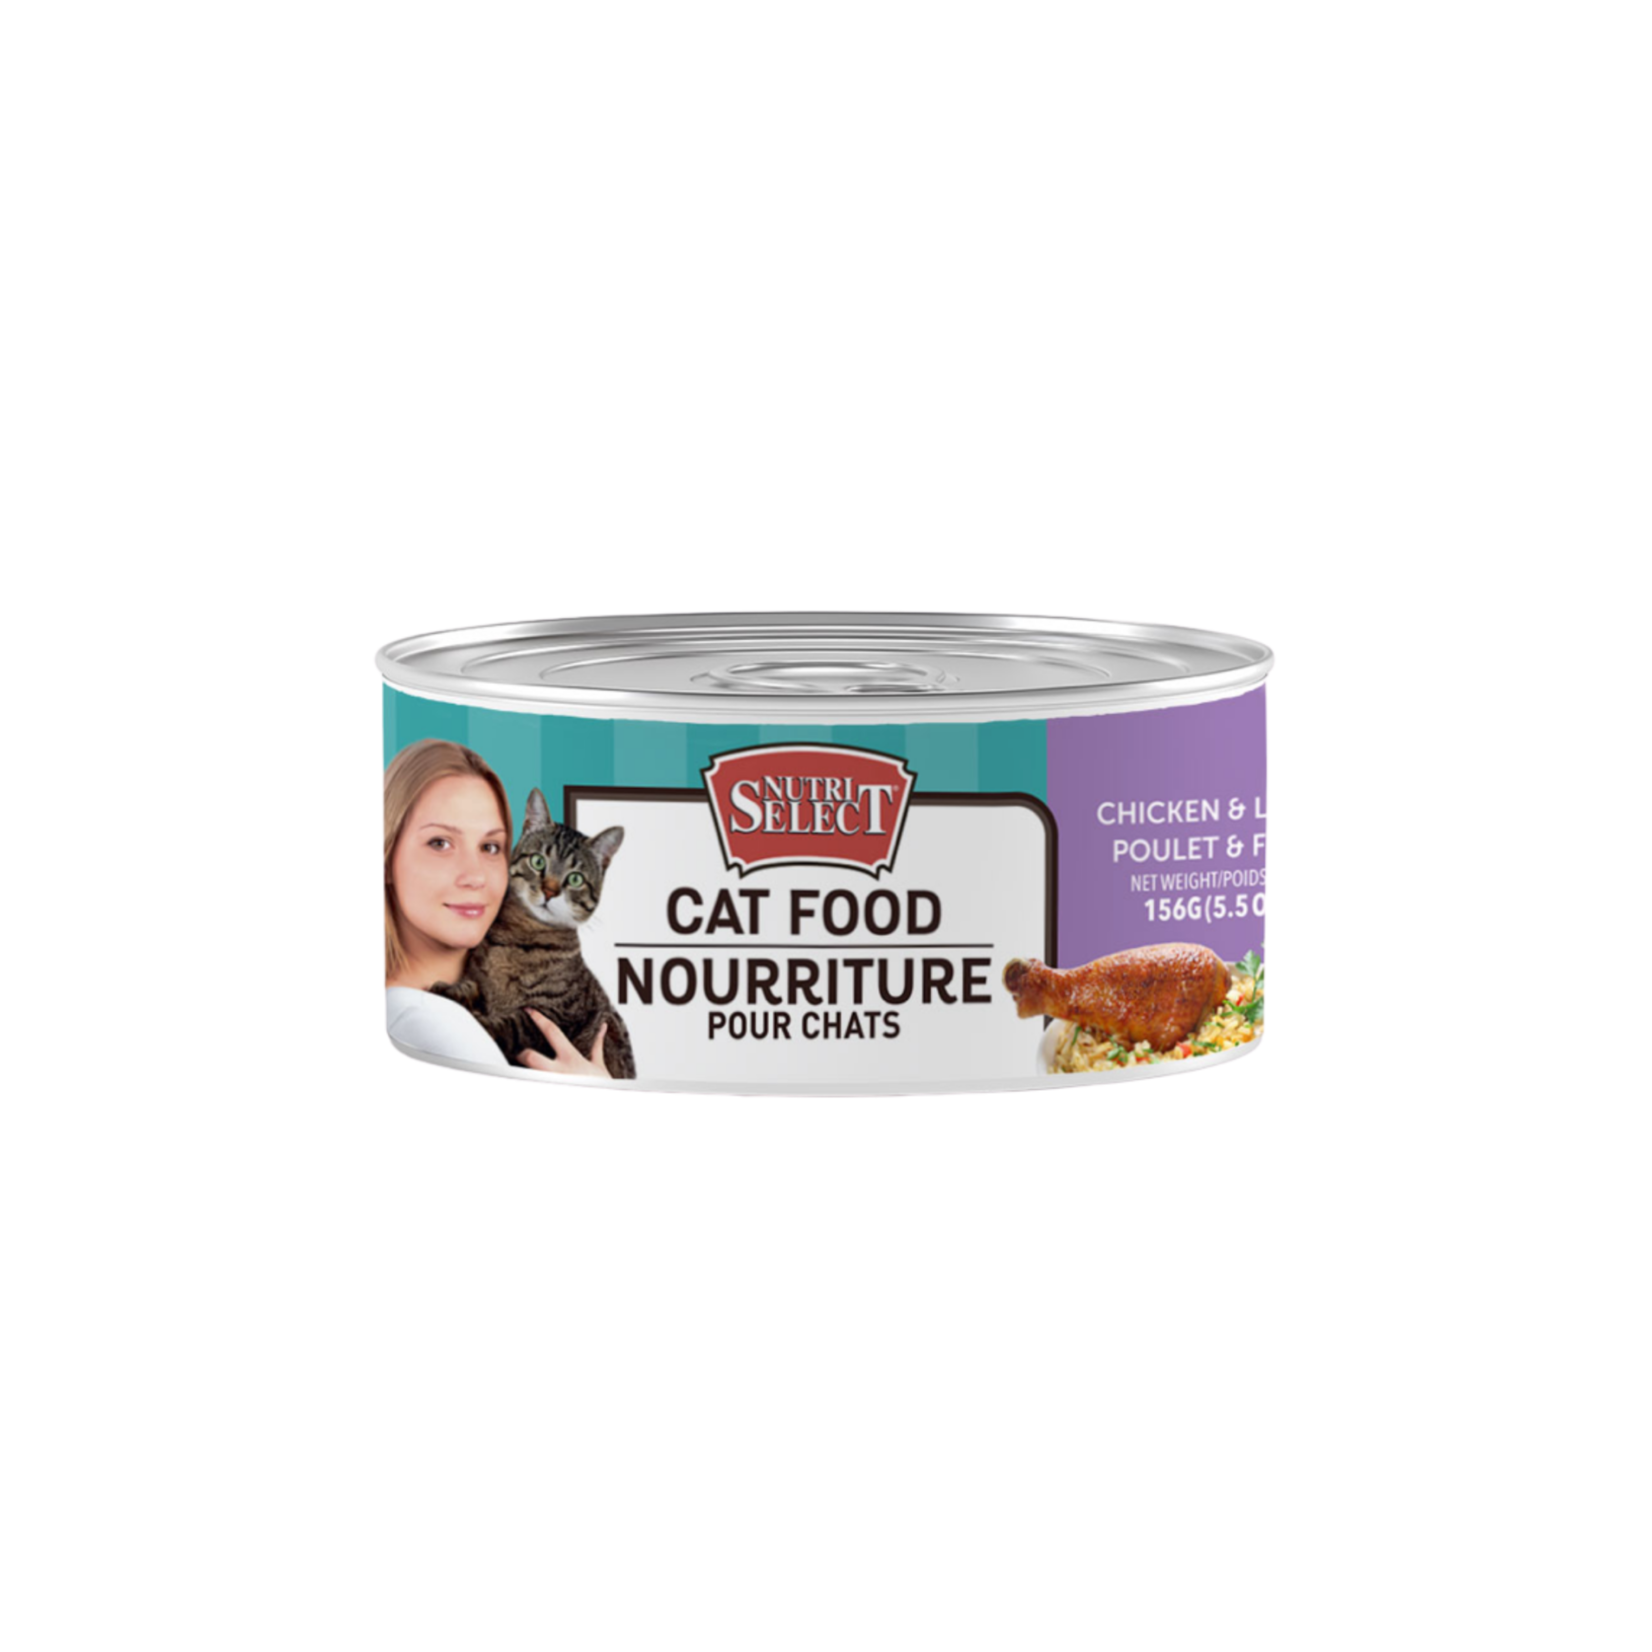 Nutri Select Nutri Select Cat Can food chicken &liver